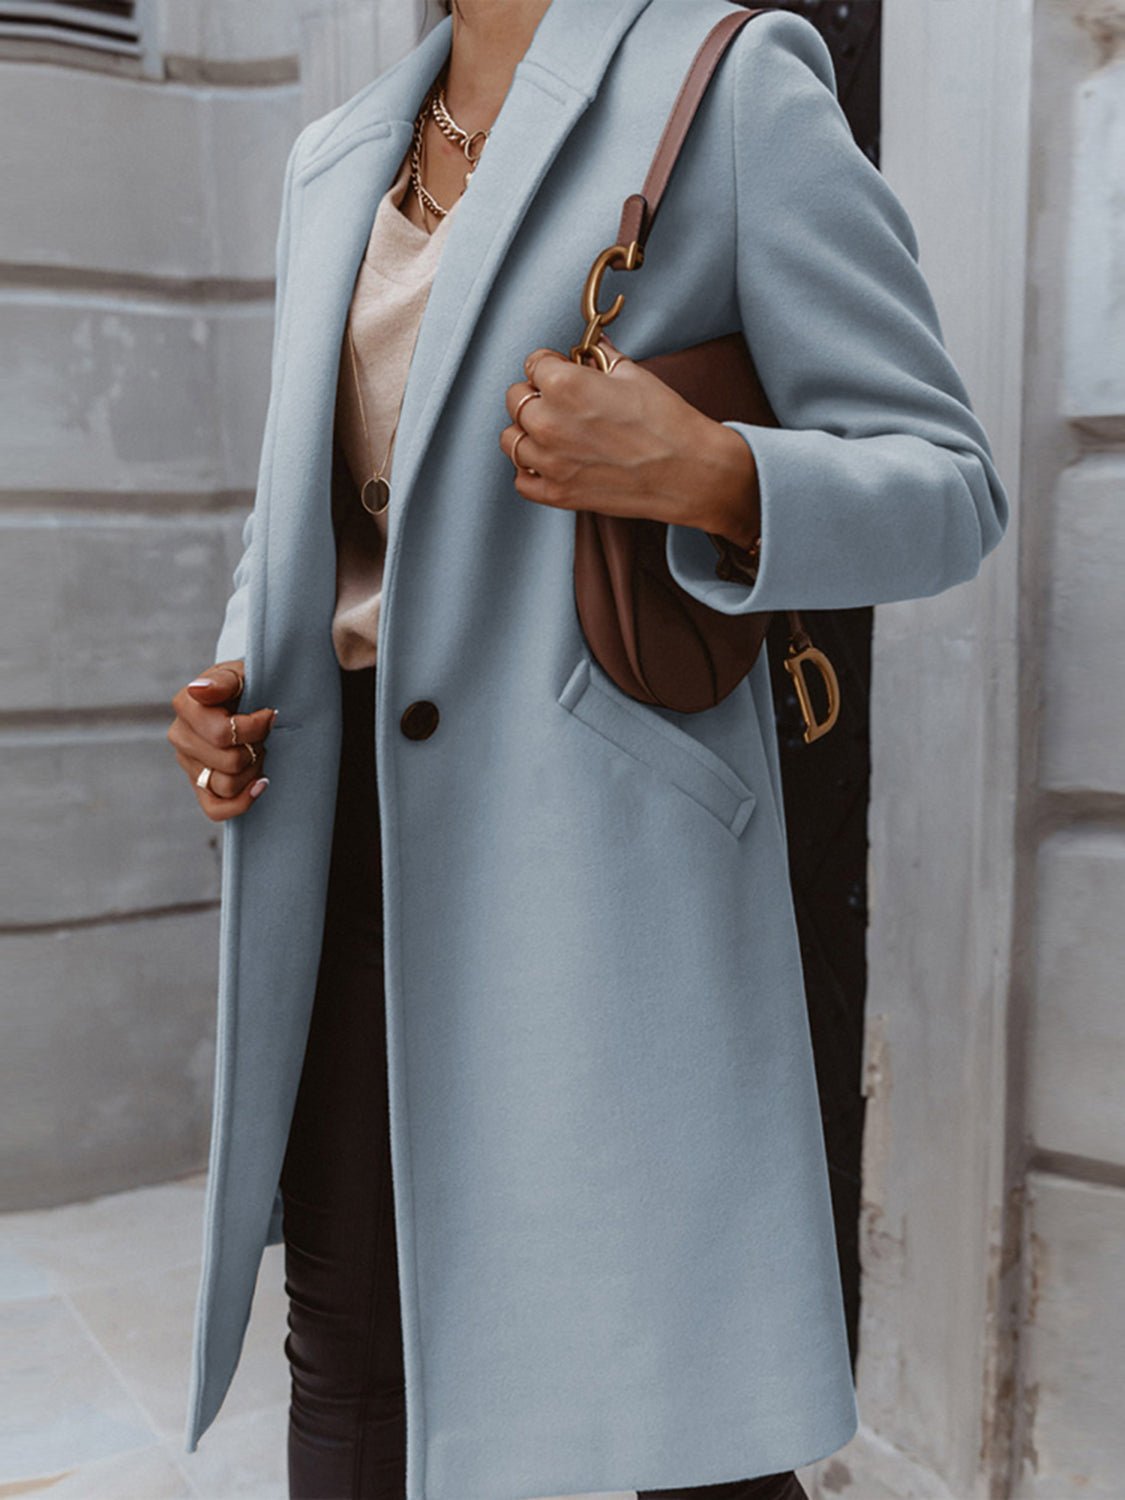 Long Sleeve Longline Coat with Pockets - Fashion Girl Online Store